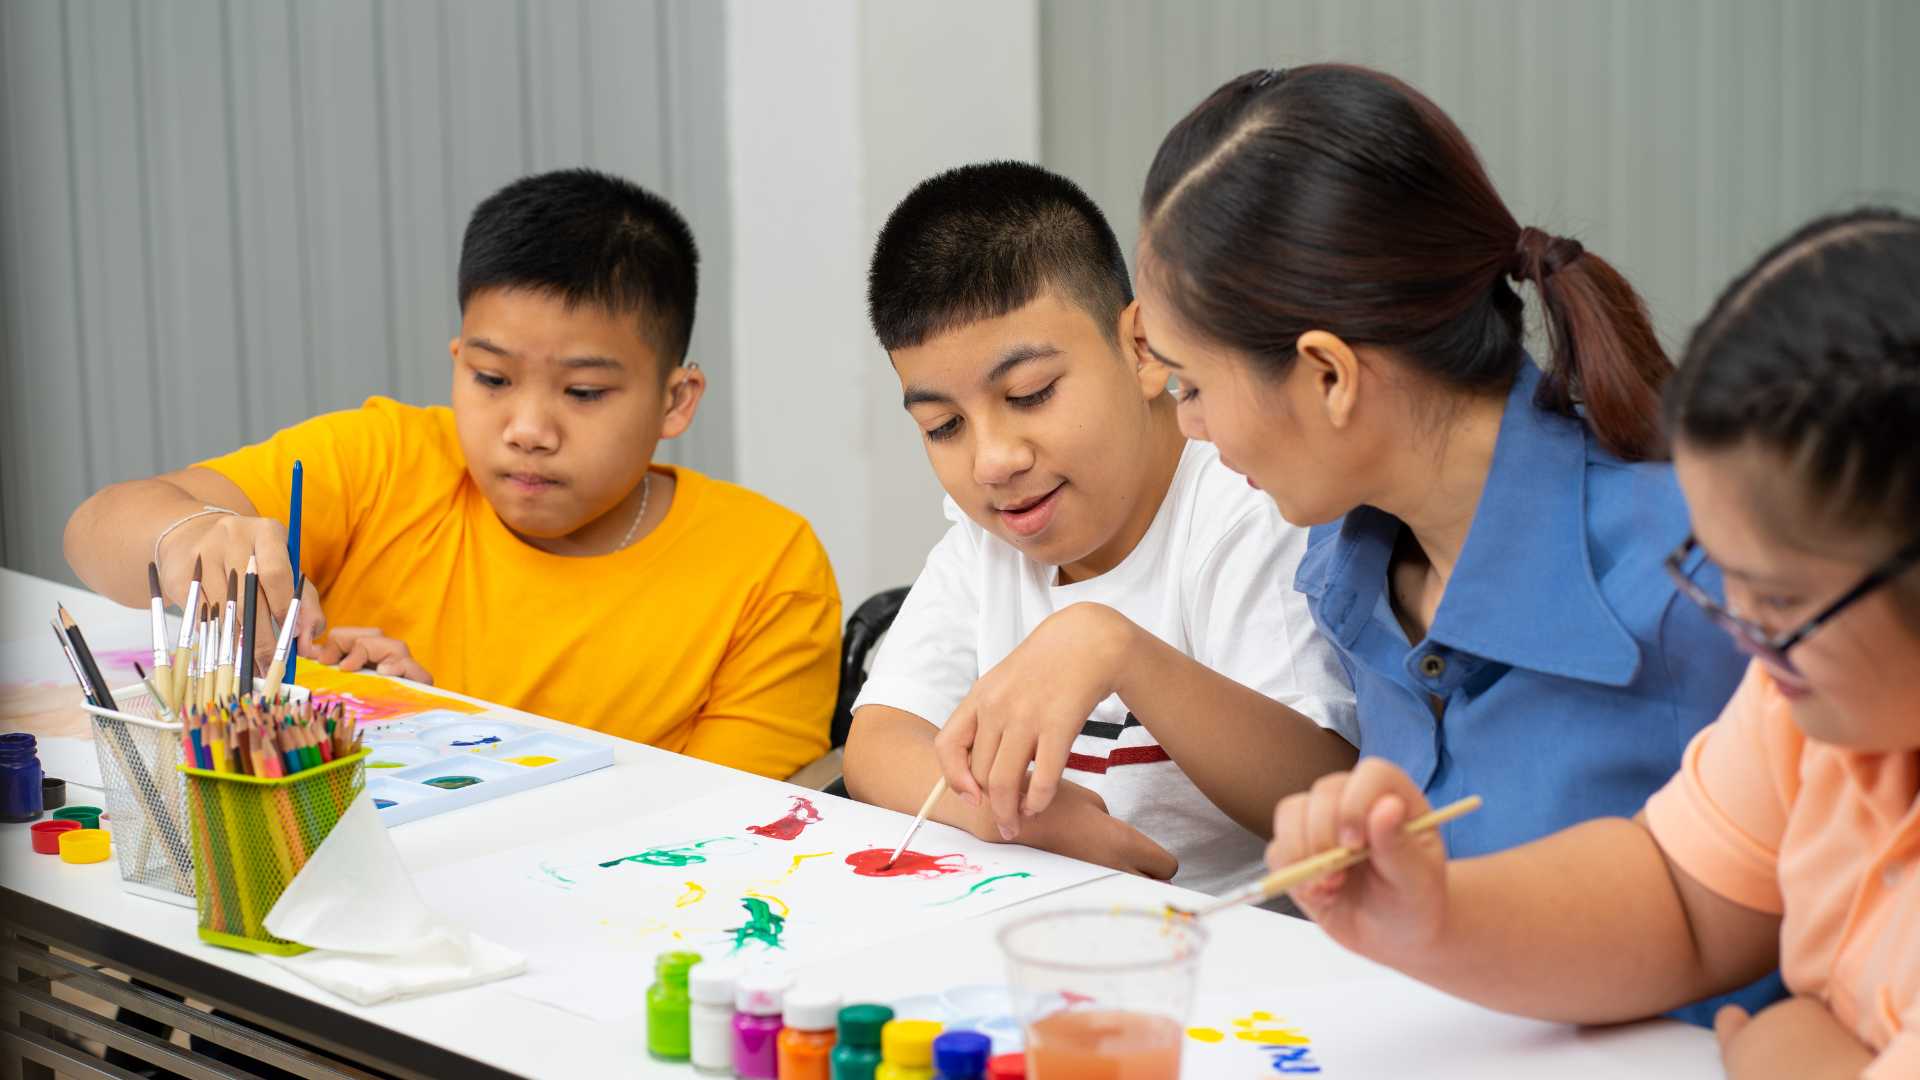 Autism support groups in Texas: Three children are sitting around a table painting; a woman is instructing the middle child.